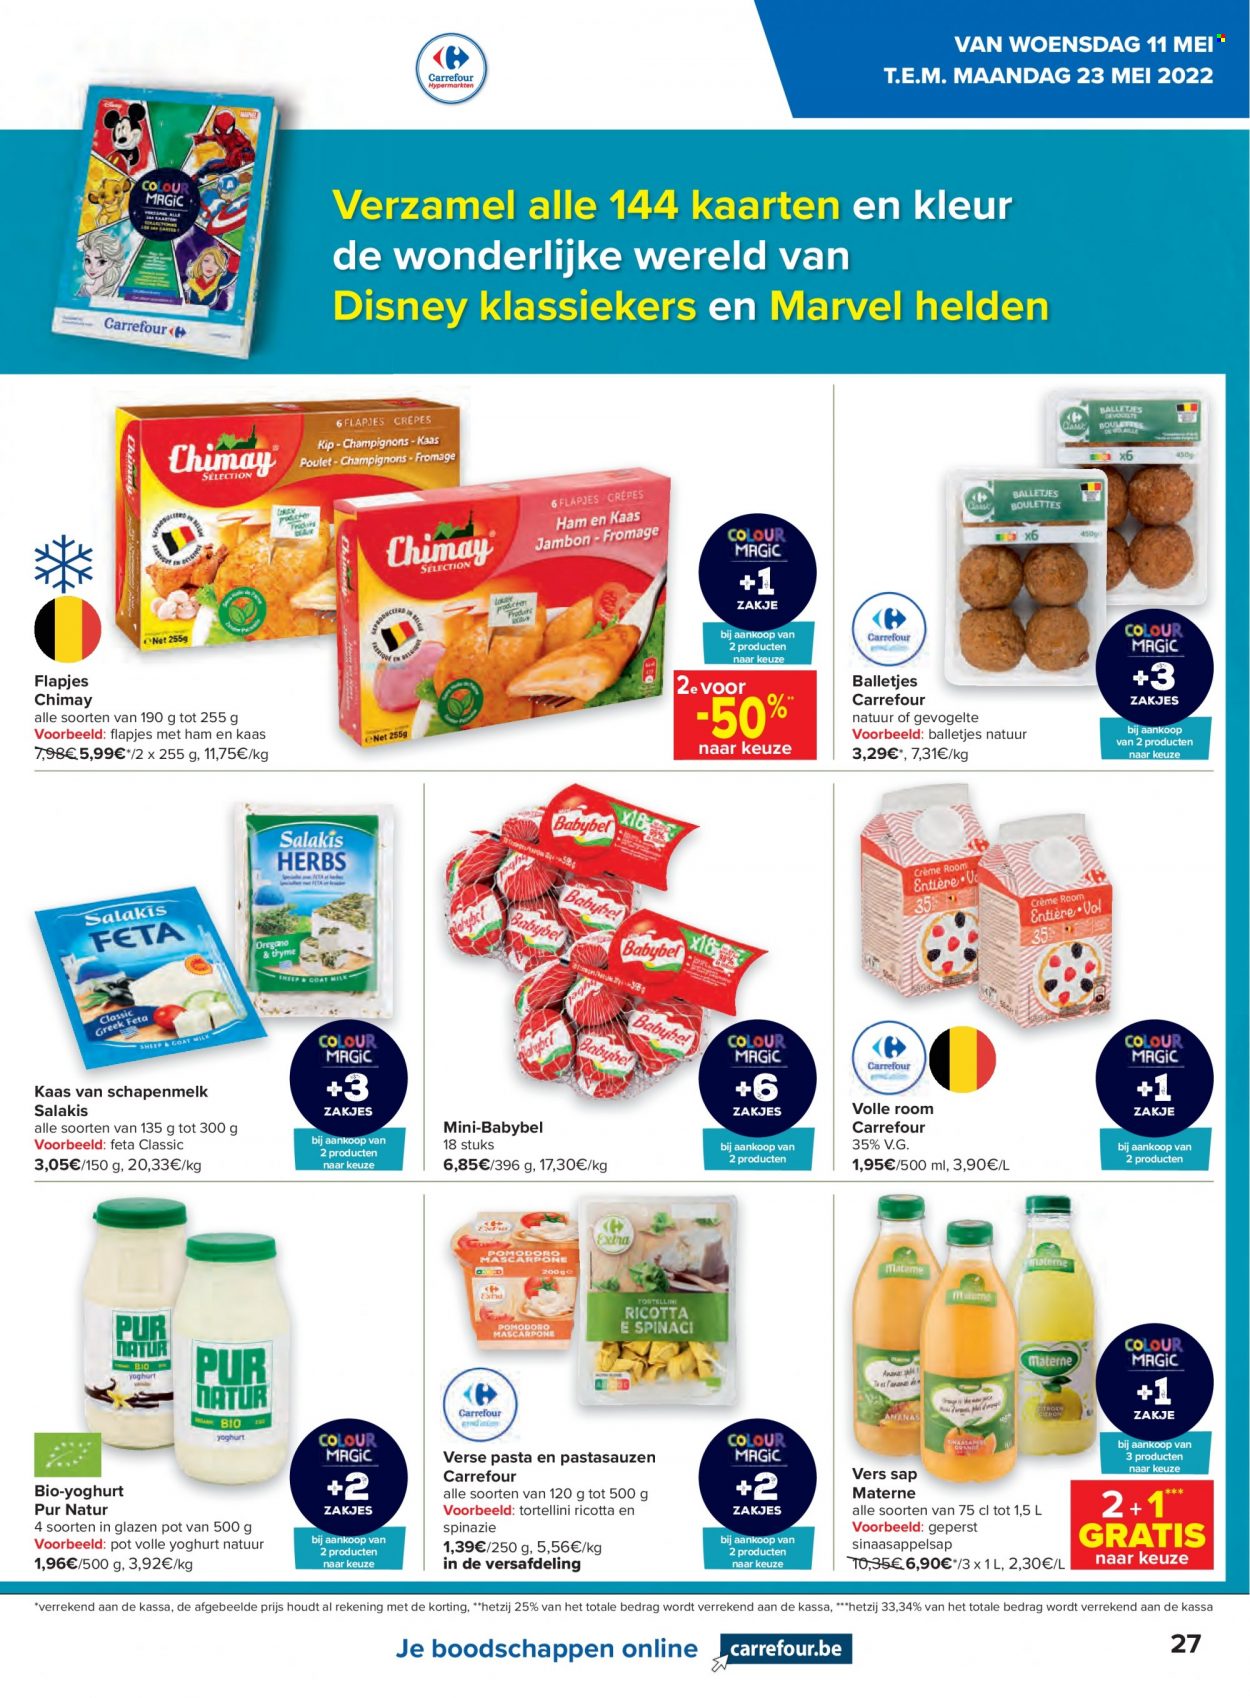 Catalogue Carrefour hypermarkt - 11.5.2022 - 23.5.2022. Page 27.